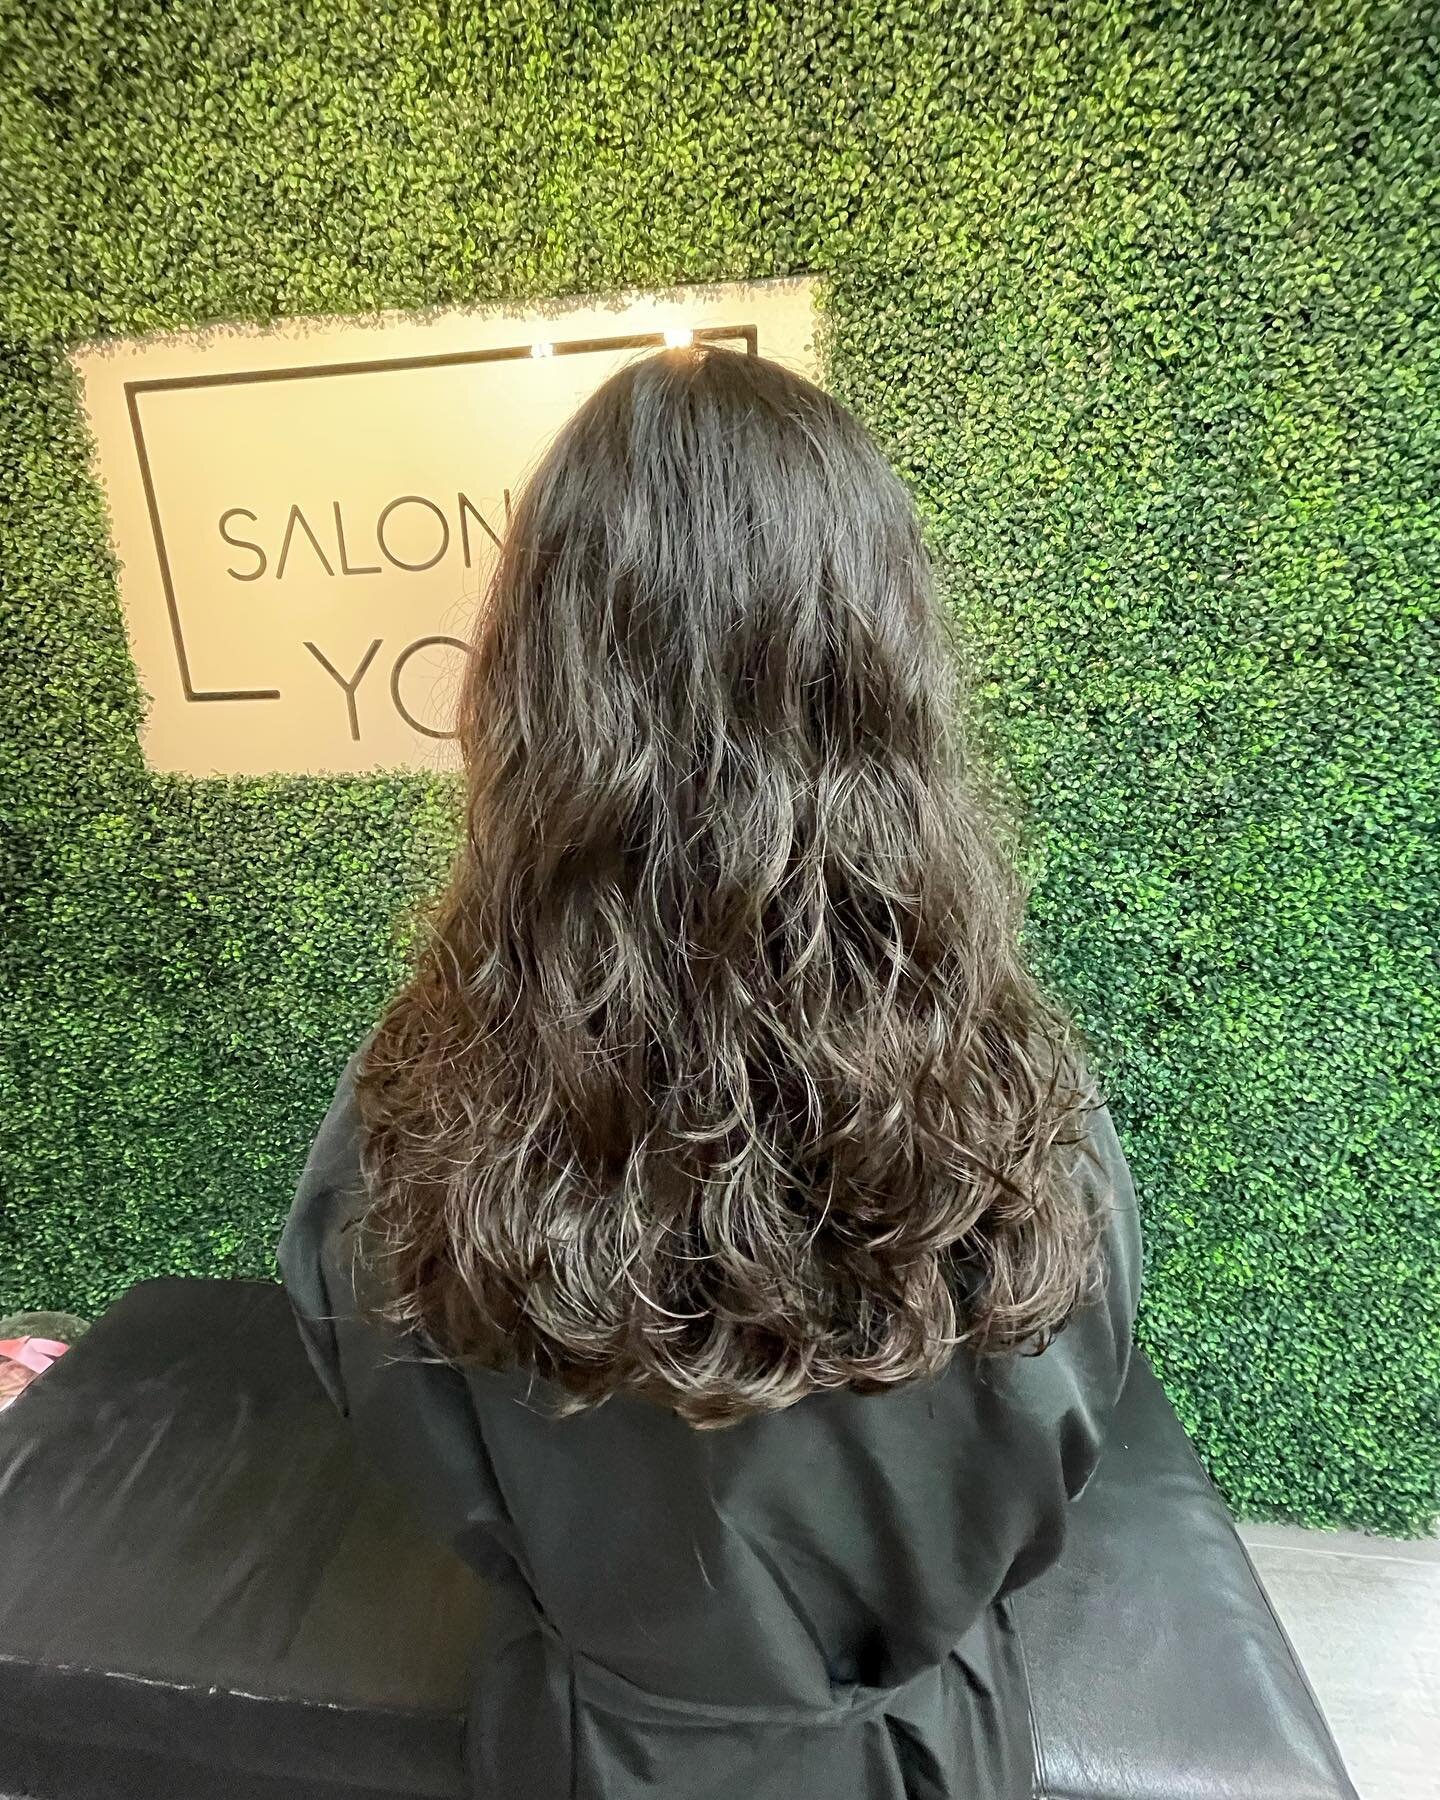 Digital perm #hippiperm 🤩 

Thinking of doing a monthly event in 2022 for just digital perm.. 
Should we? 🤔🤔🤔 

#salonbyyoo #onlyou

For customer satisfaction, a 1:1 consultation will be performed before any service.

For appointment/consultation